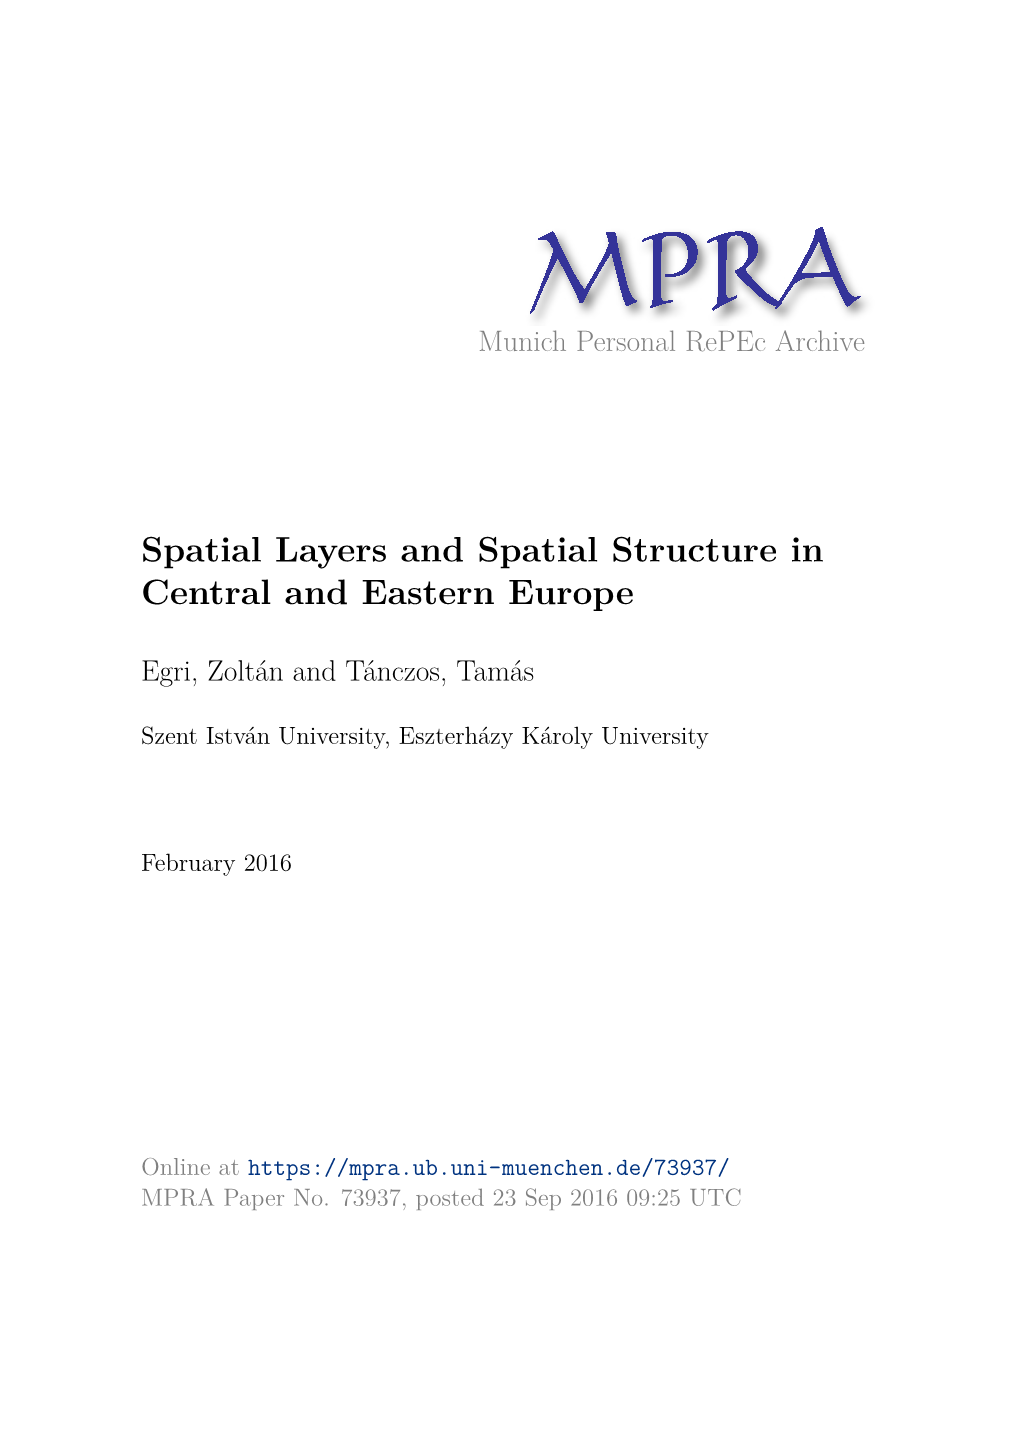 Spatial Layers and Spatial Structure in Central and Eastern Europe